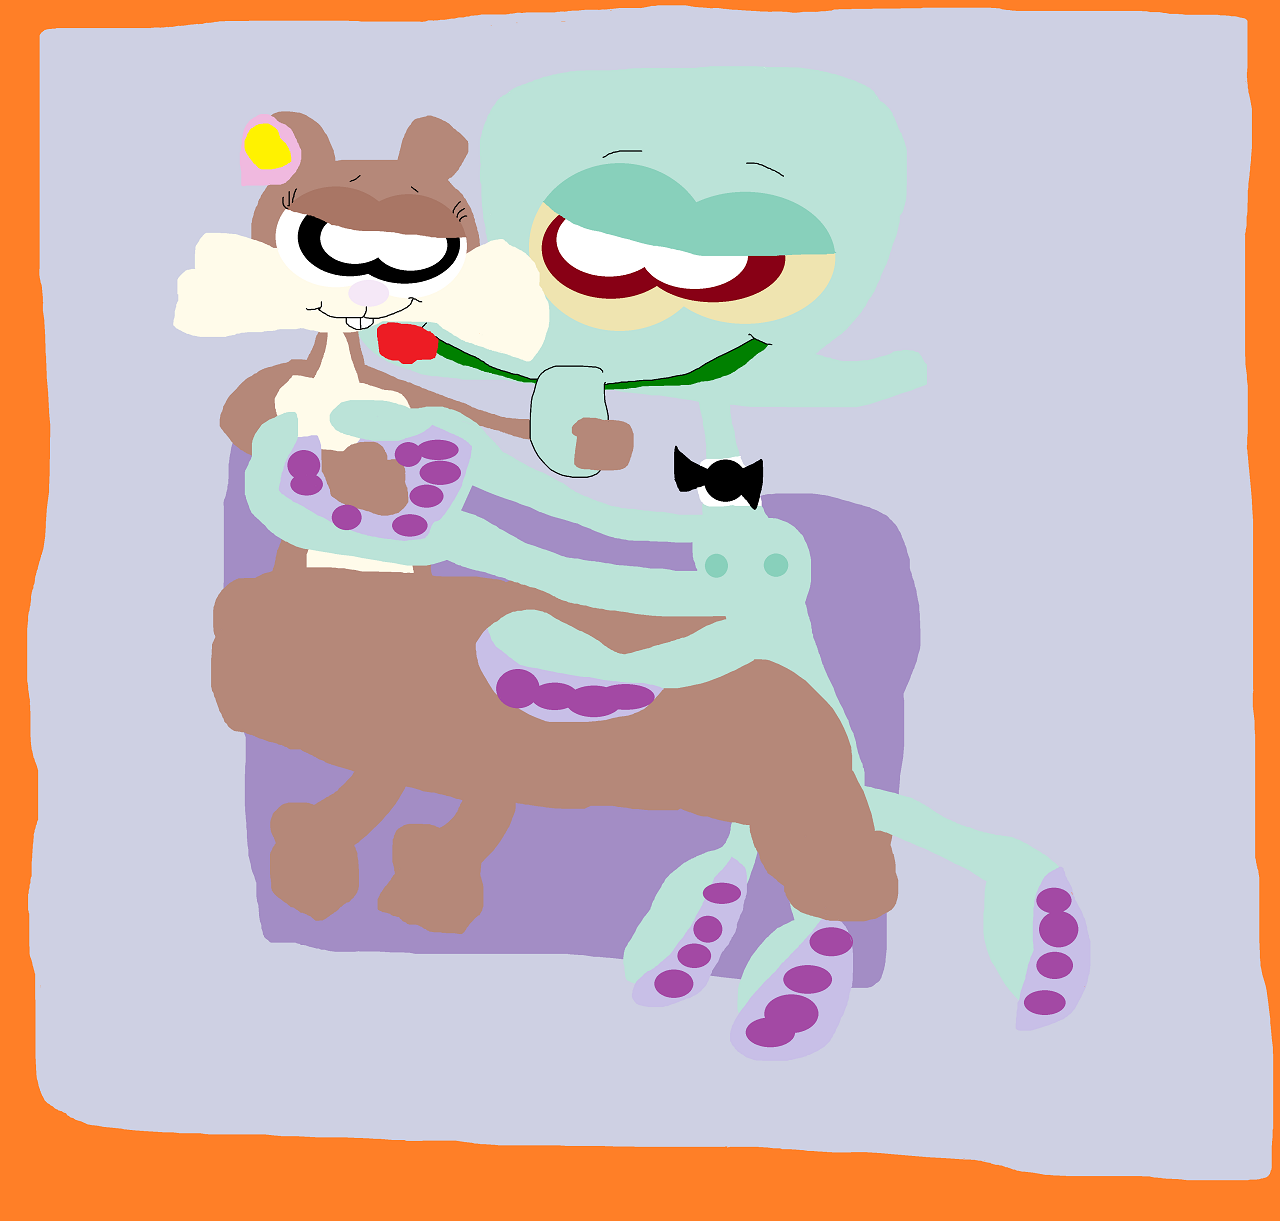 Squidward With A Long Stemmed Rose In Bed With Sandy by Falconlobo